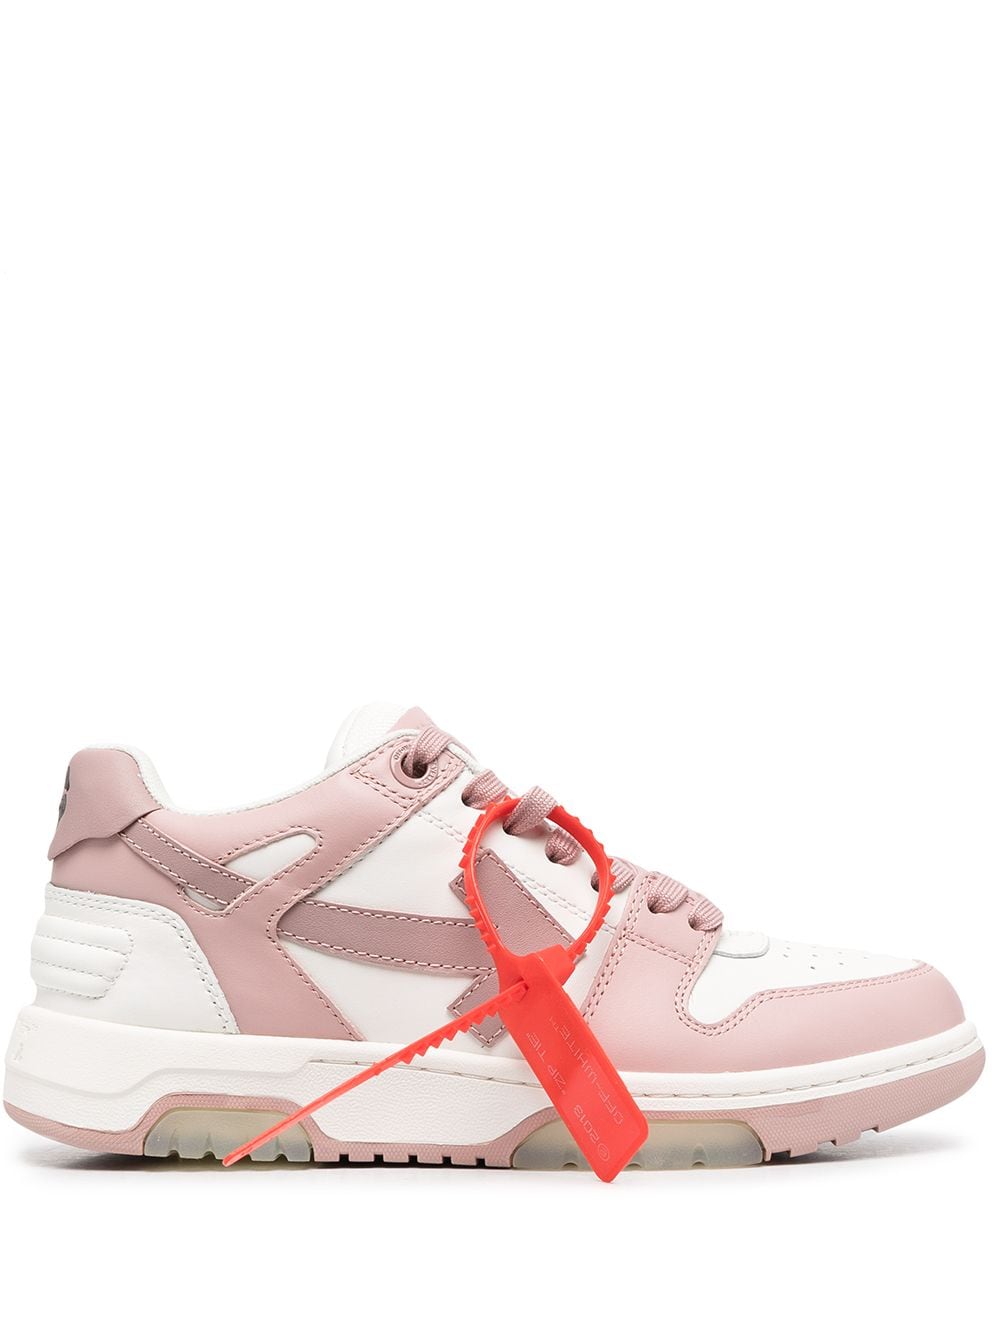 OFF WHITE - Baskets OOO